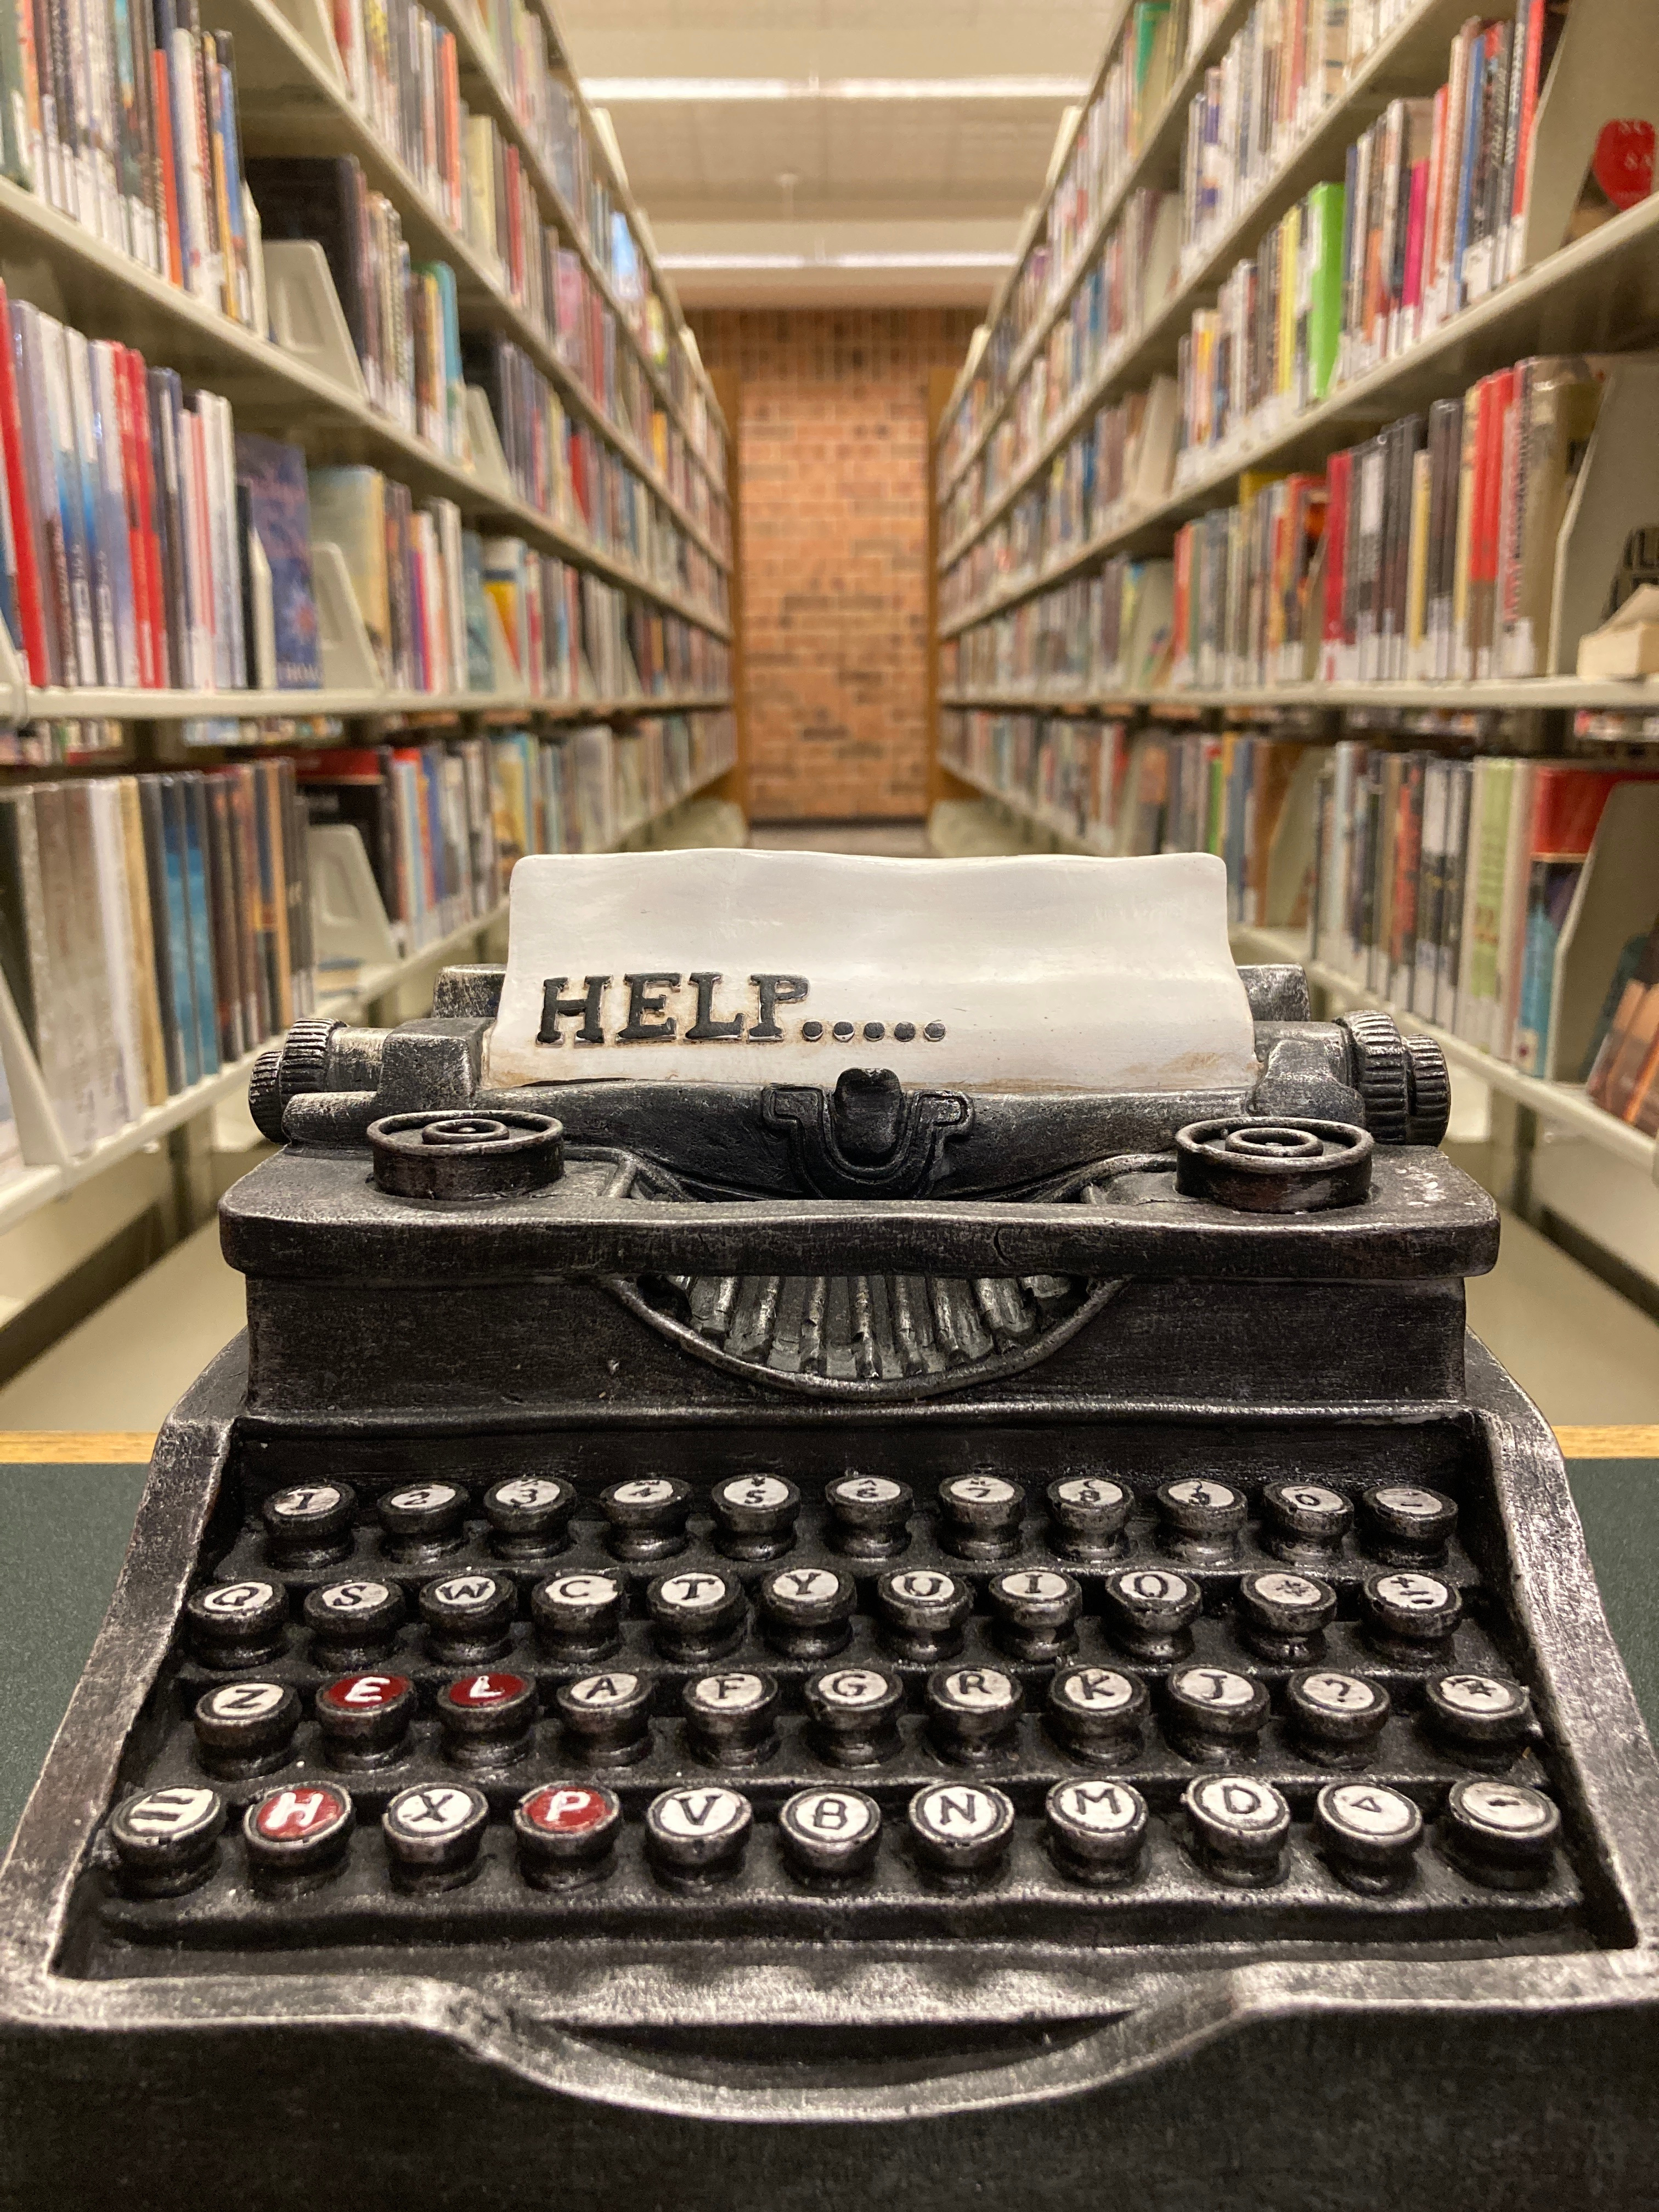 A small typewriter paperweight. The paper in it says Help. Stacks of books stretch out behind it